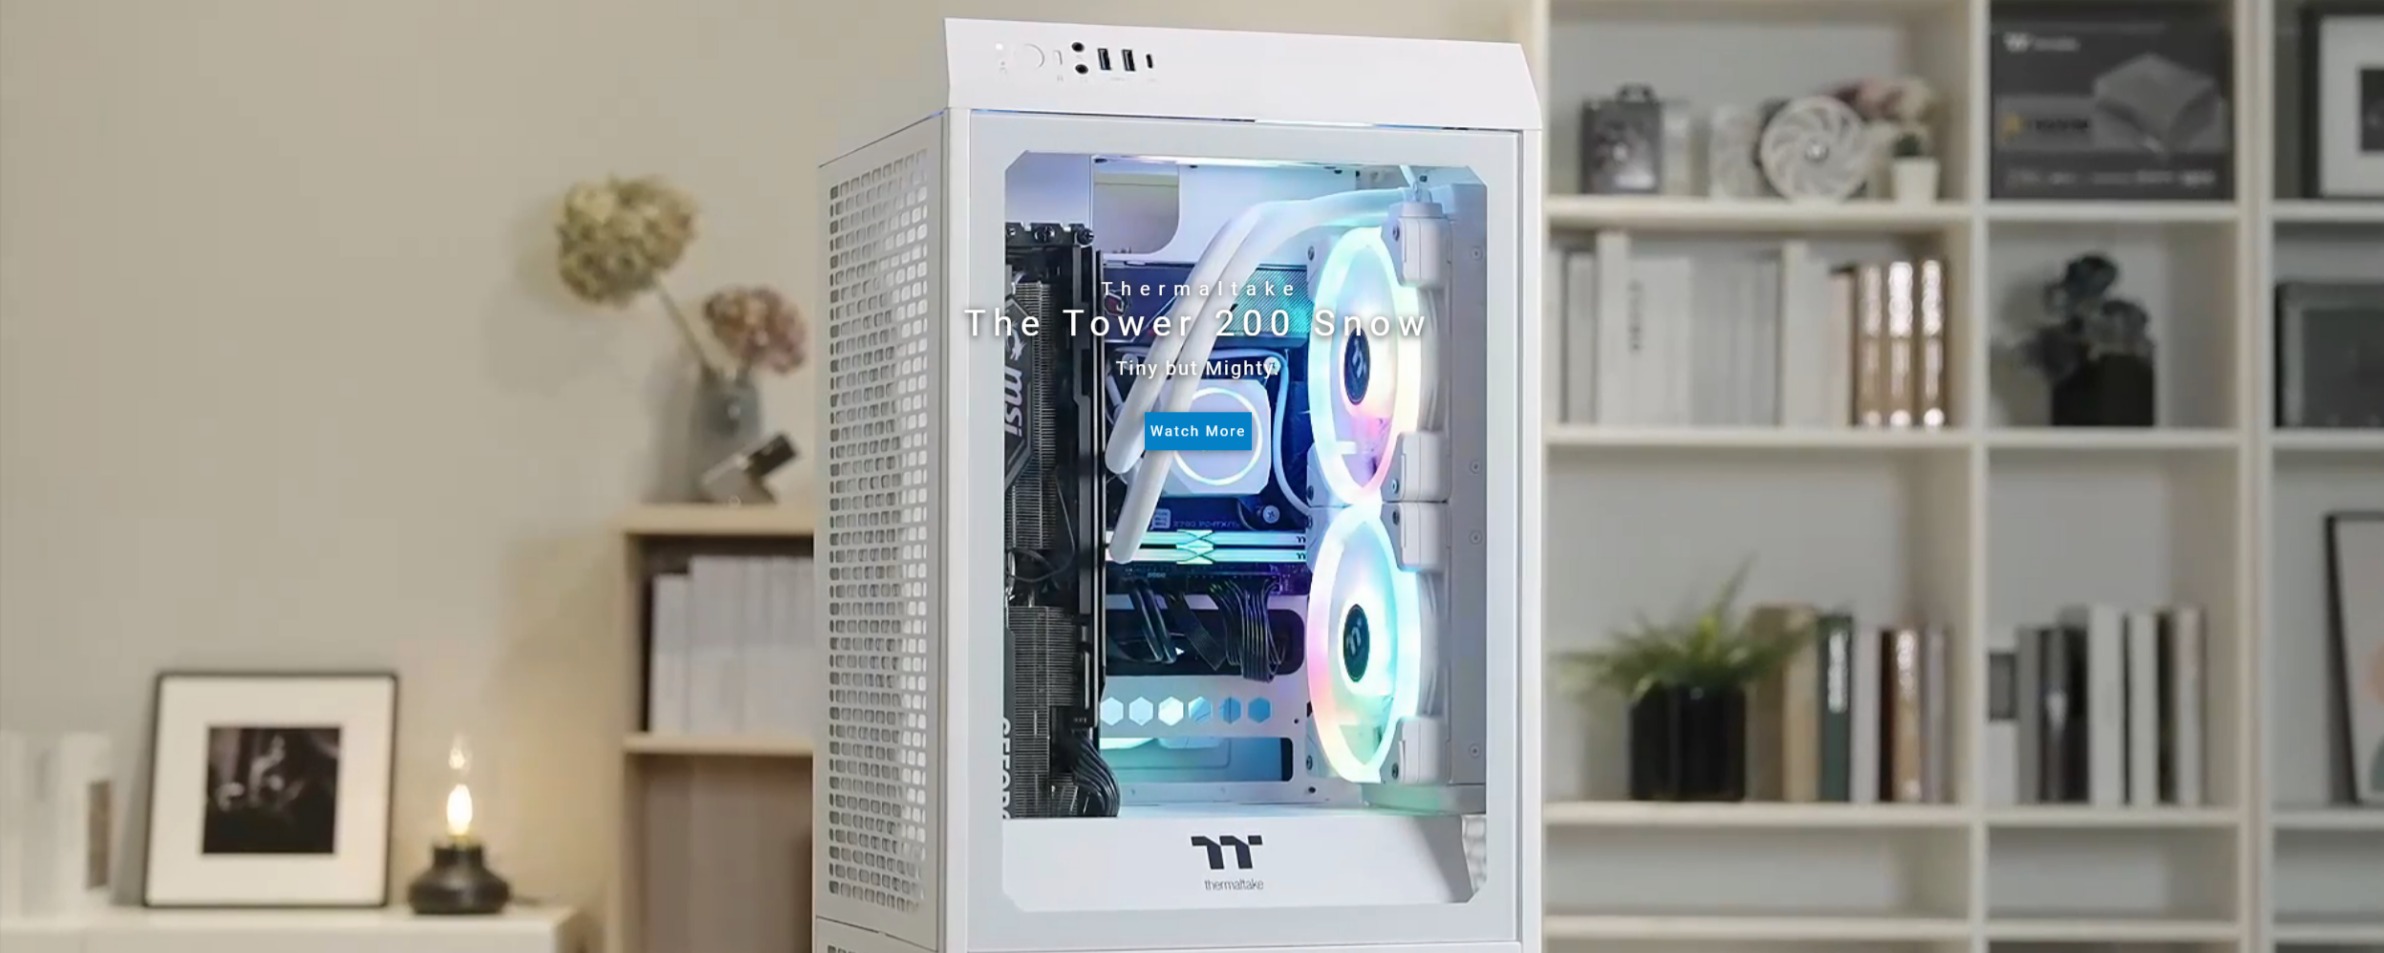 A large marketing image providing additional information about the product Thermaltake The Tower 200 - Mini Tower Case (Snow) - Additional alt info not provided